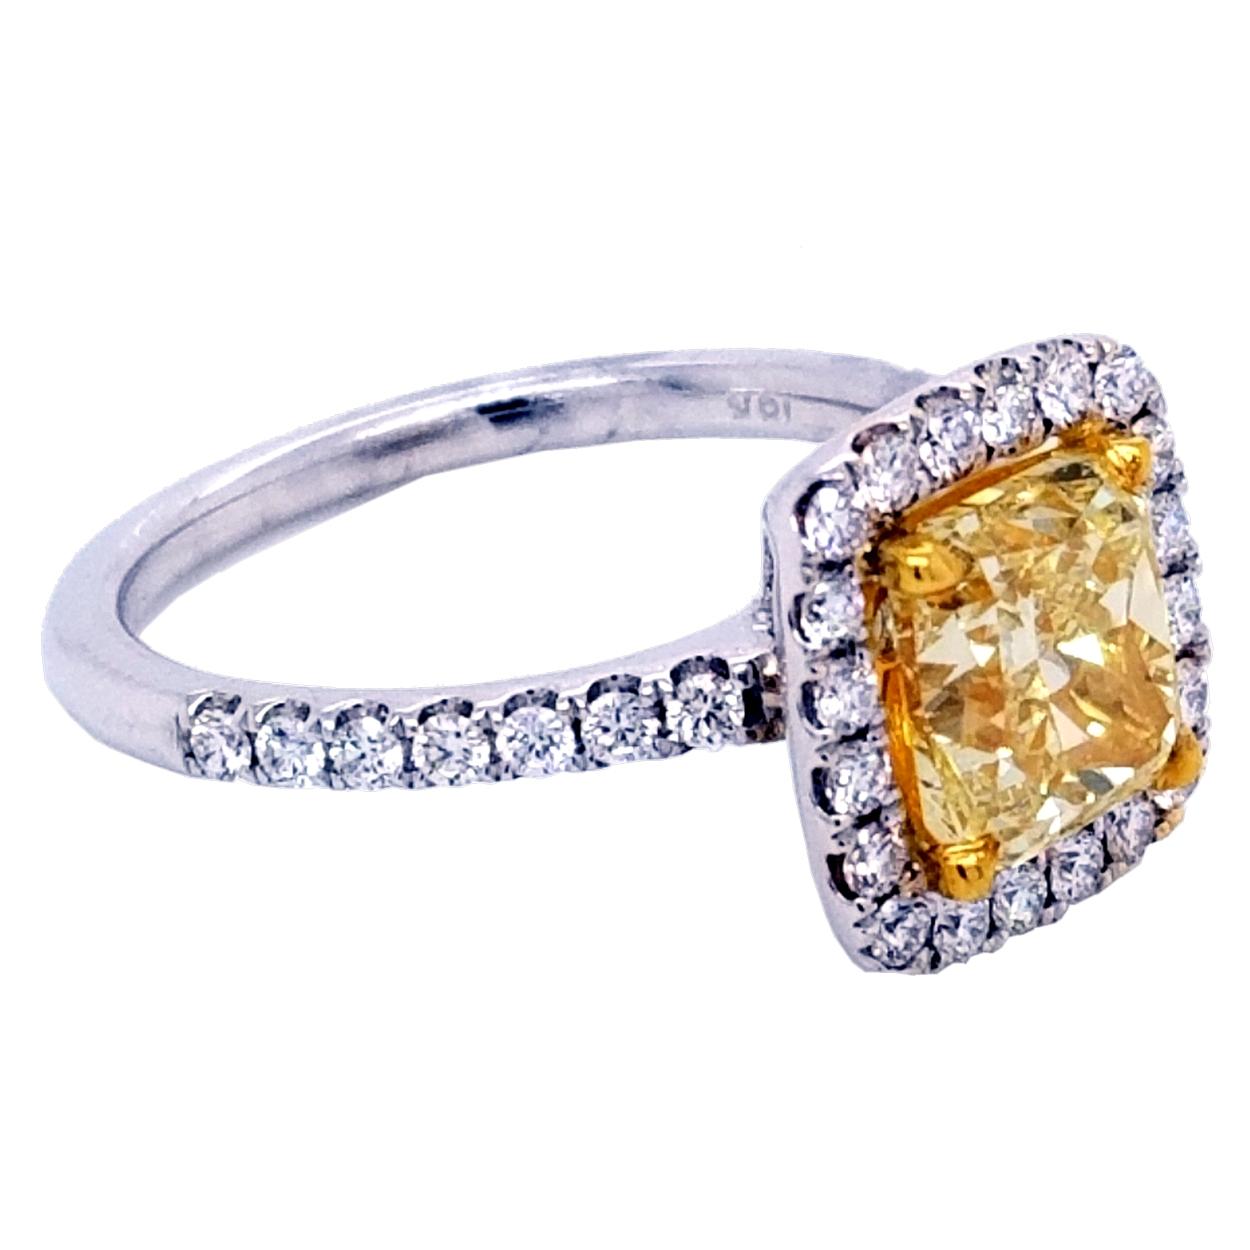 A very fine Cushion Cut Yellow Y-Z/SI2 GIA certified center Diamond set in a fine 18k gold pave set Ring with halo with total weight of 0.46 Ct diamonds on the side. #sayitwithyellow .

Diamond specs:
Center stone: 2.02 Ct GIA Certified W-X/SI1